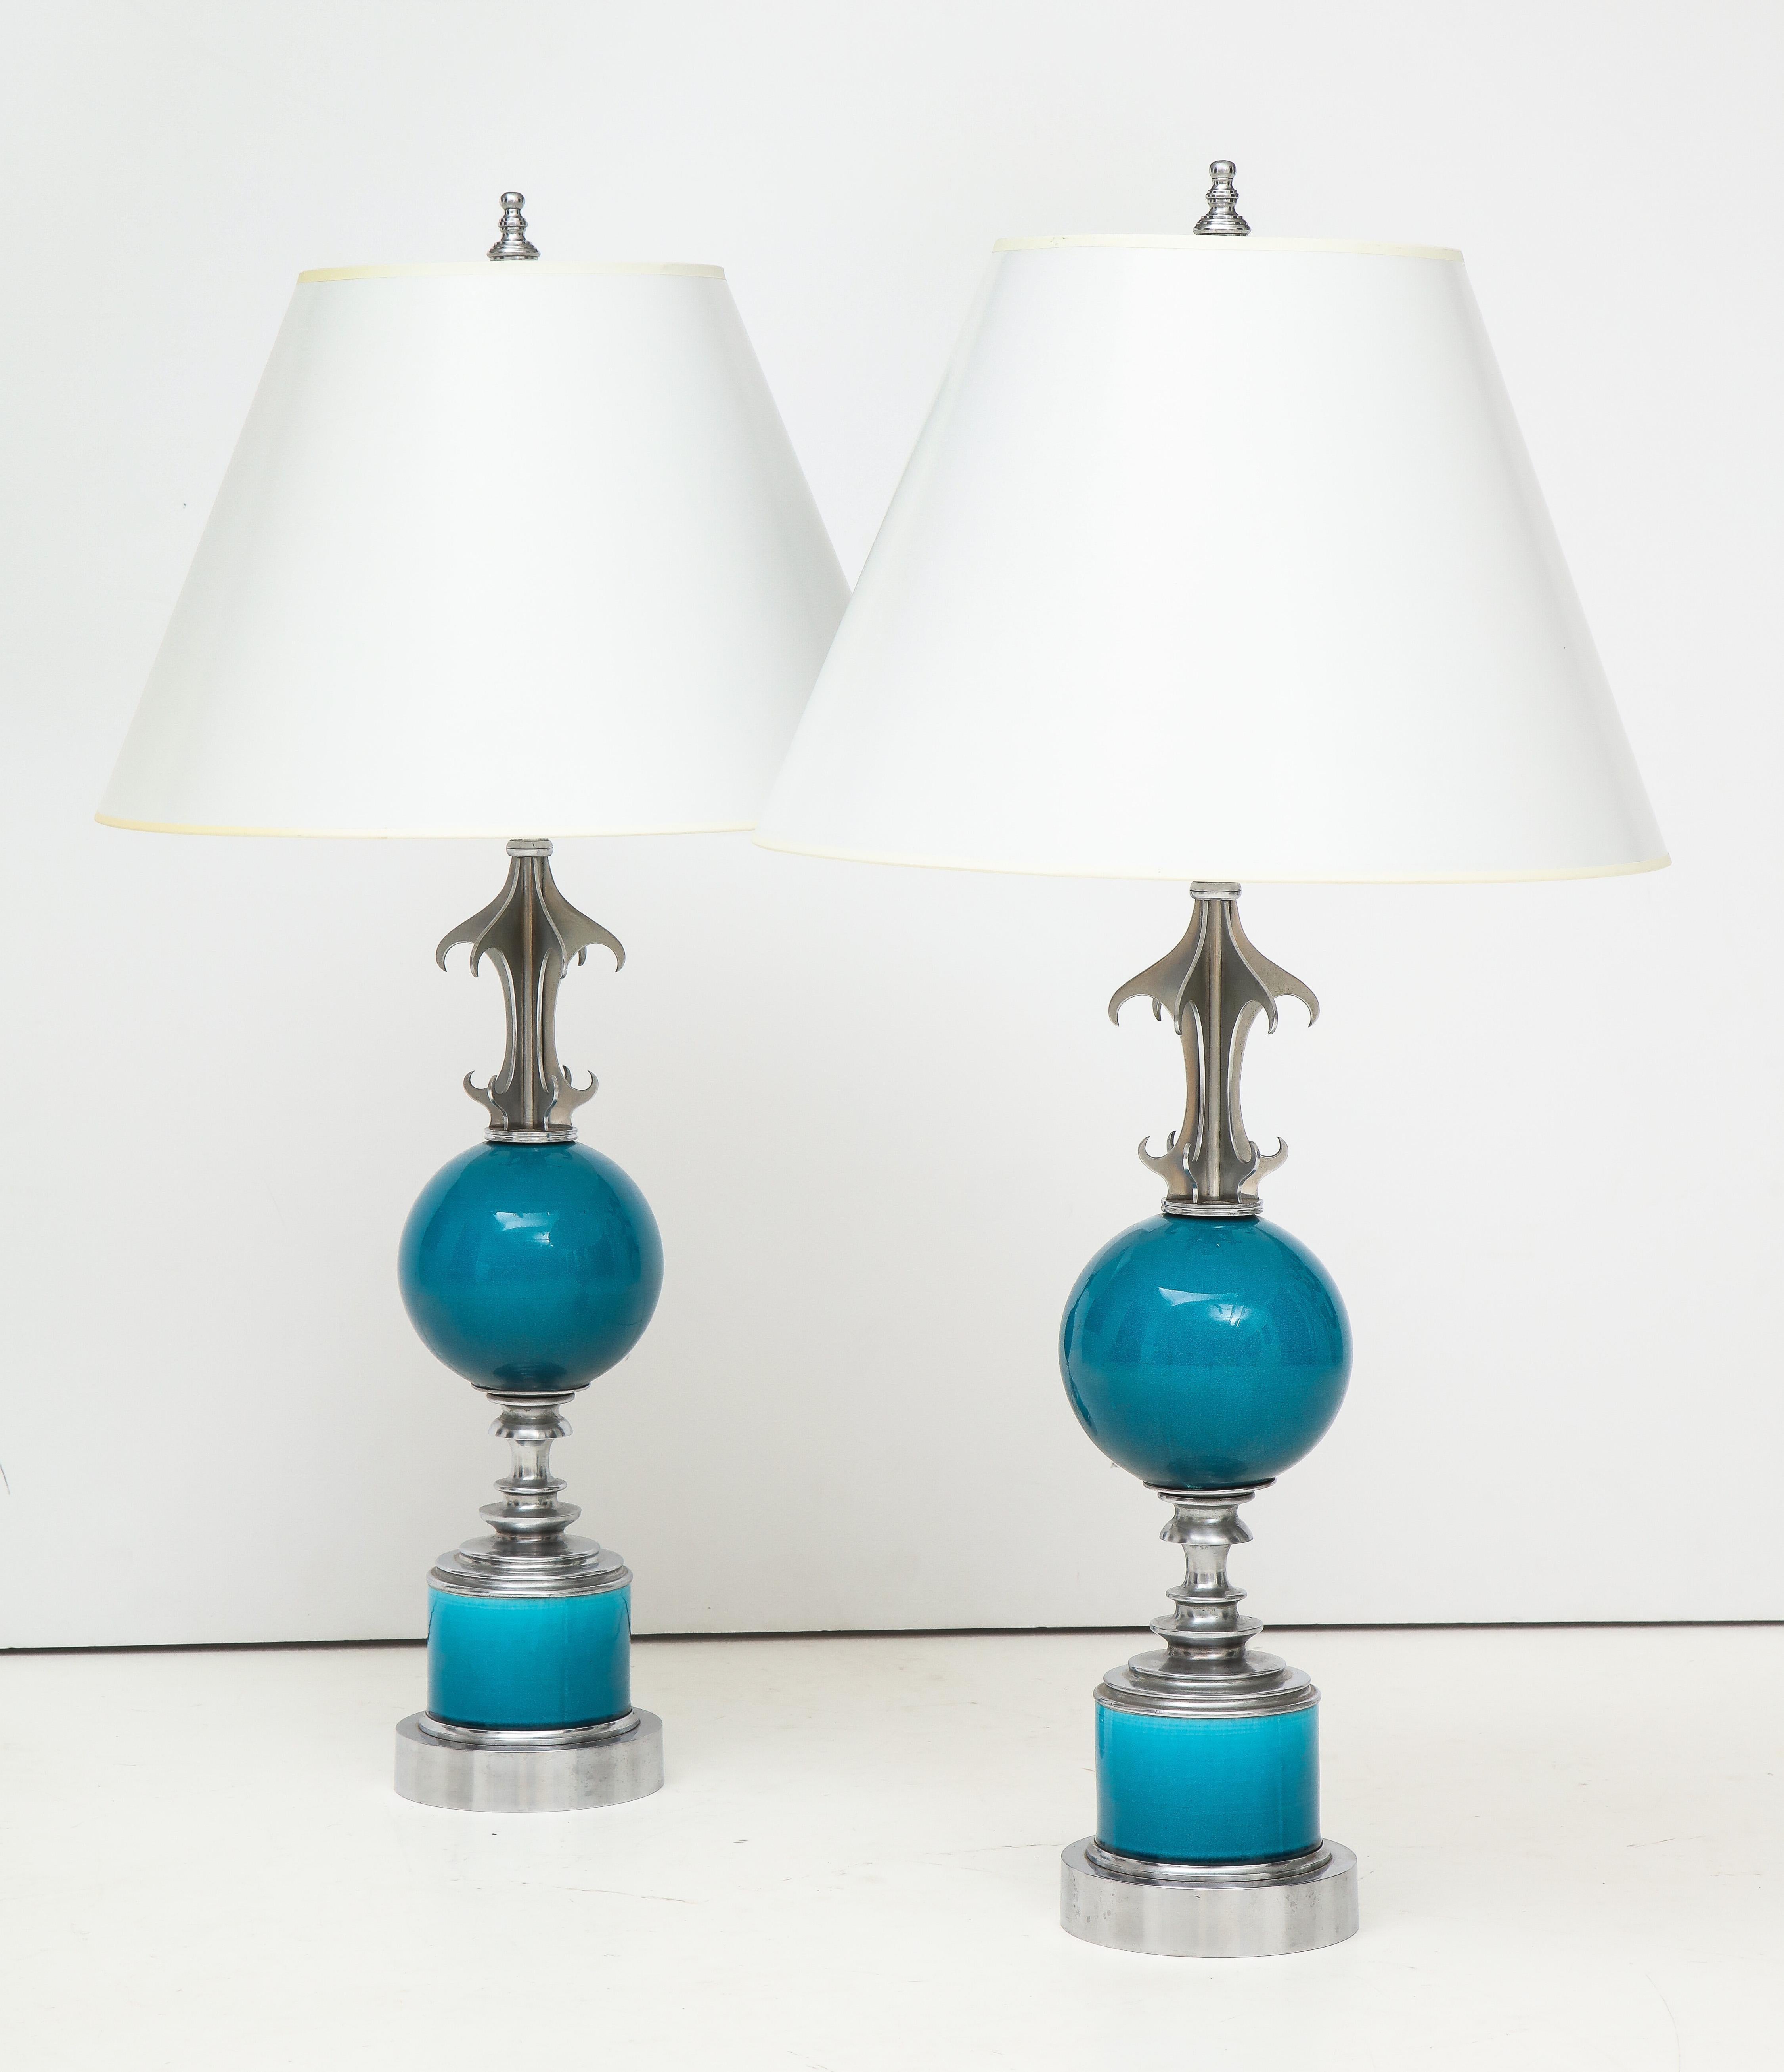 Pair of Blue Ceramic and Nickel-Plated Metal Table Lamps For Sale 8